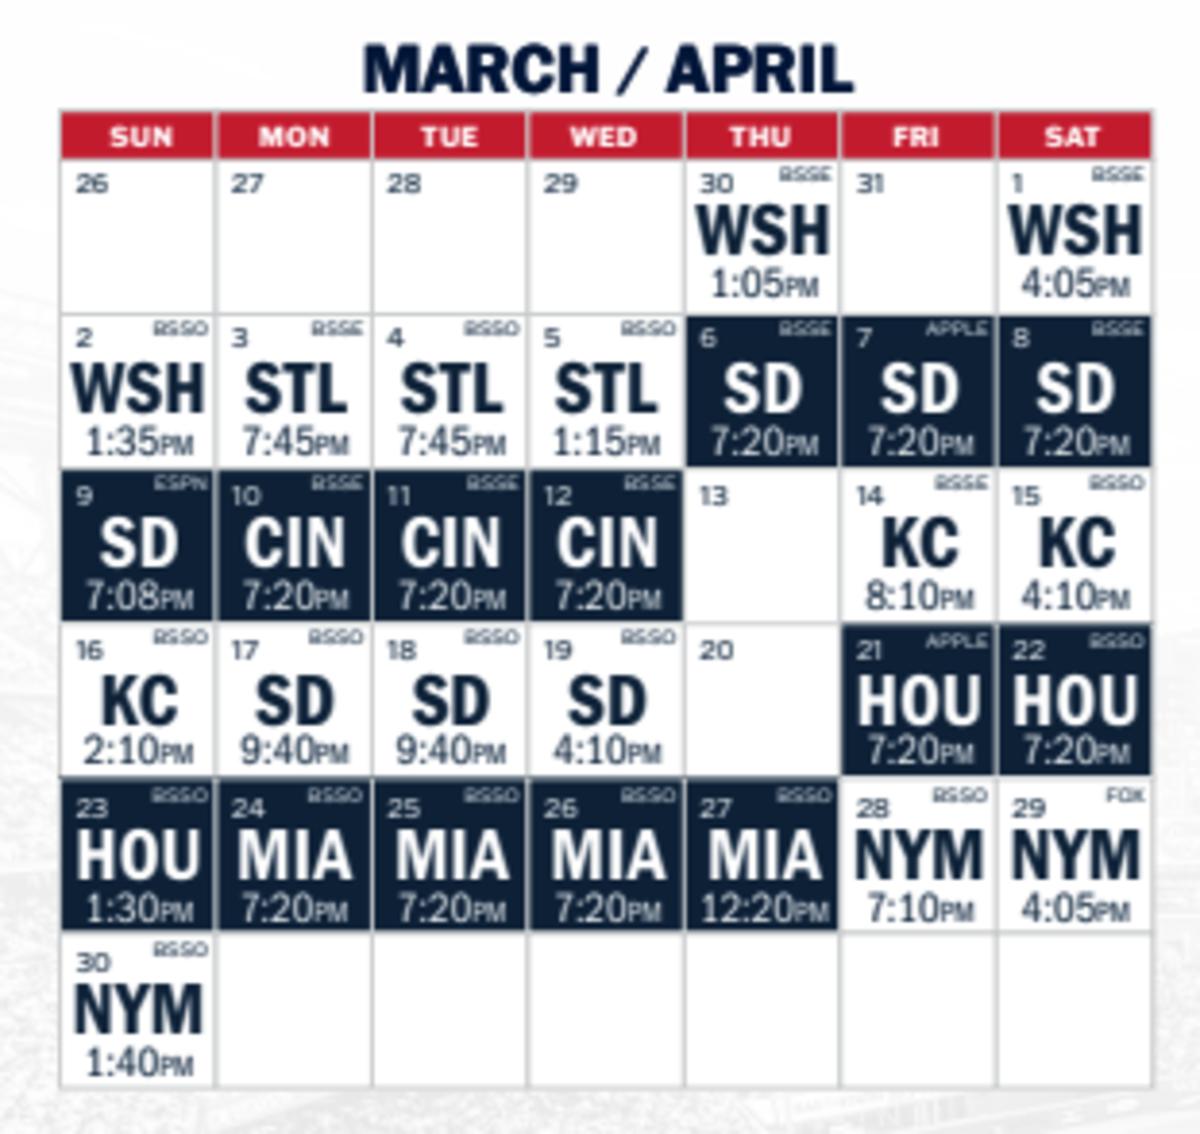 The Atlanta Braves have a rough April schedule to open the season